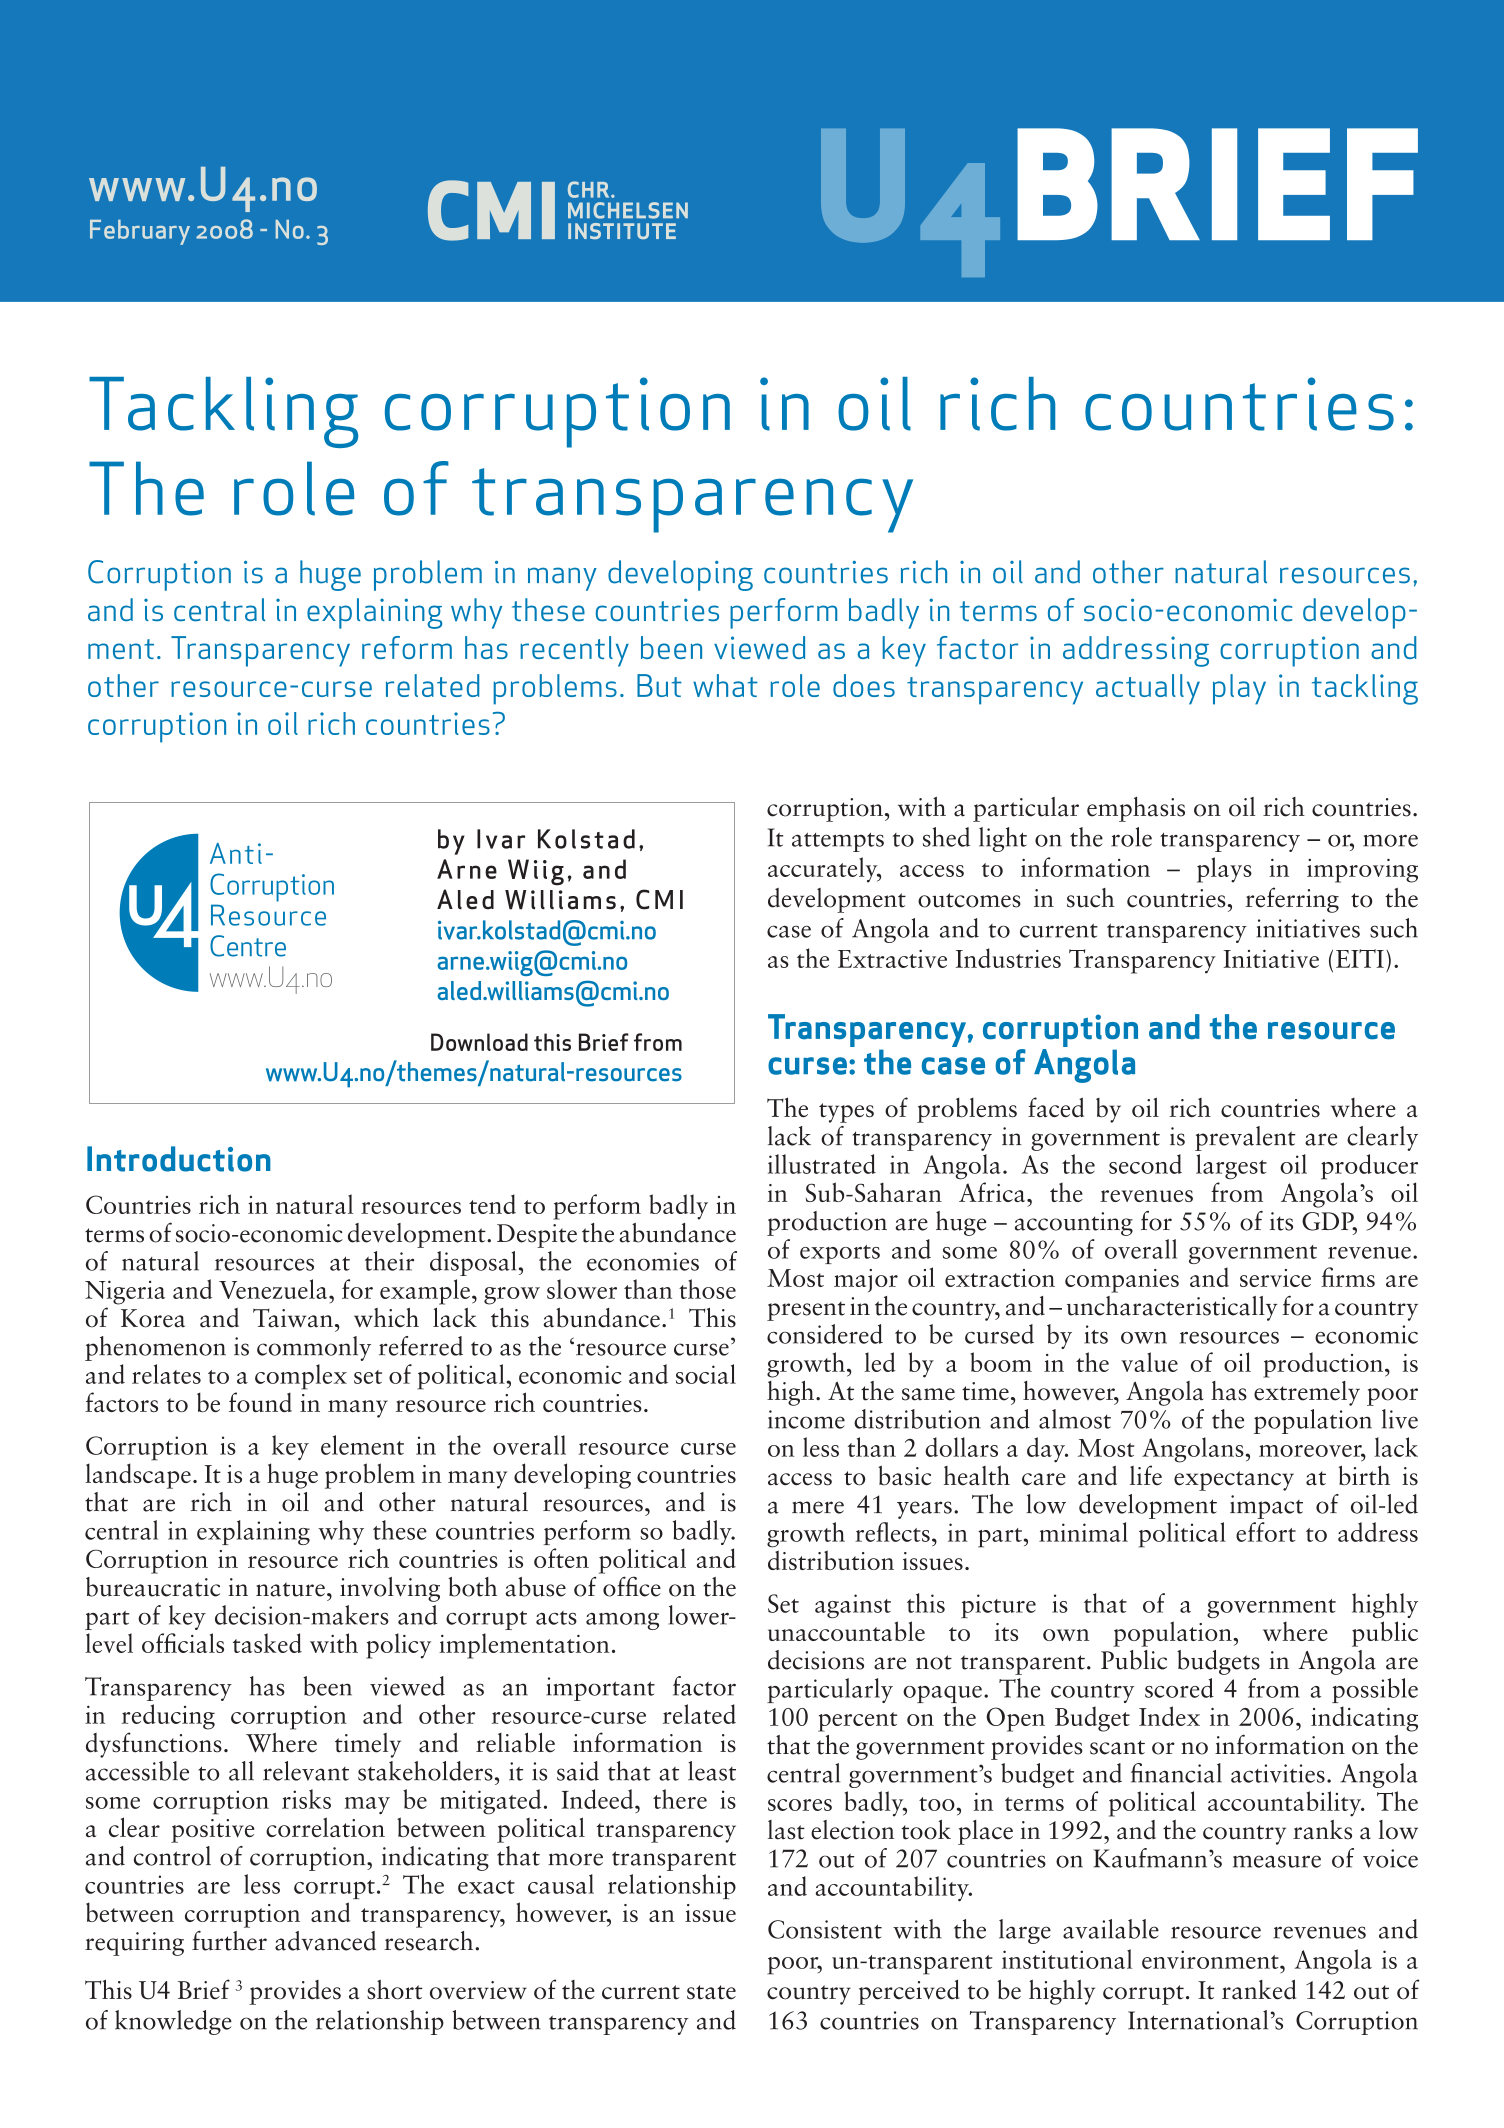 Tackling corruption in oil rich countries: The role of transparency